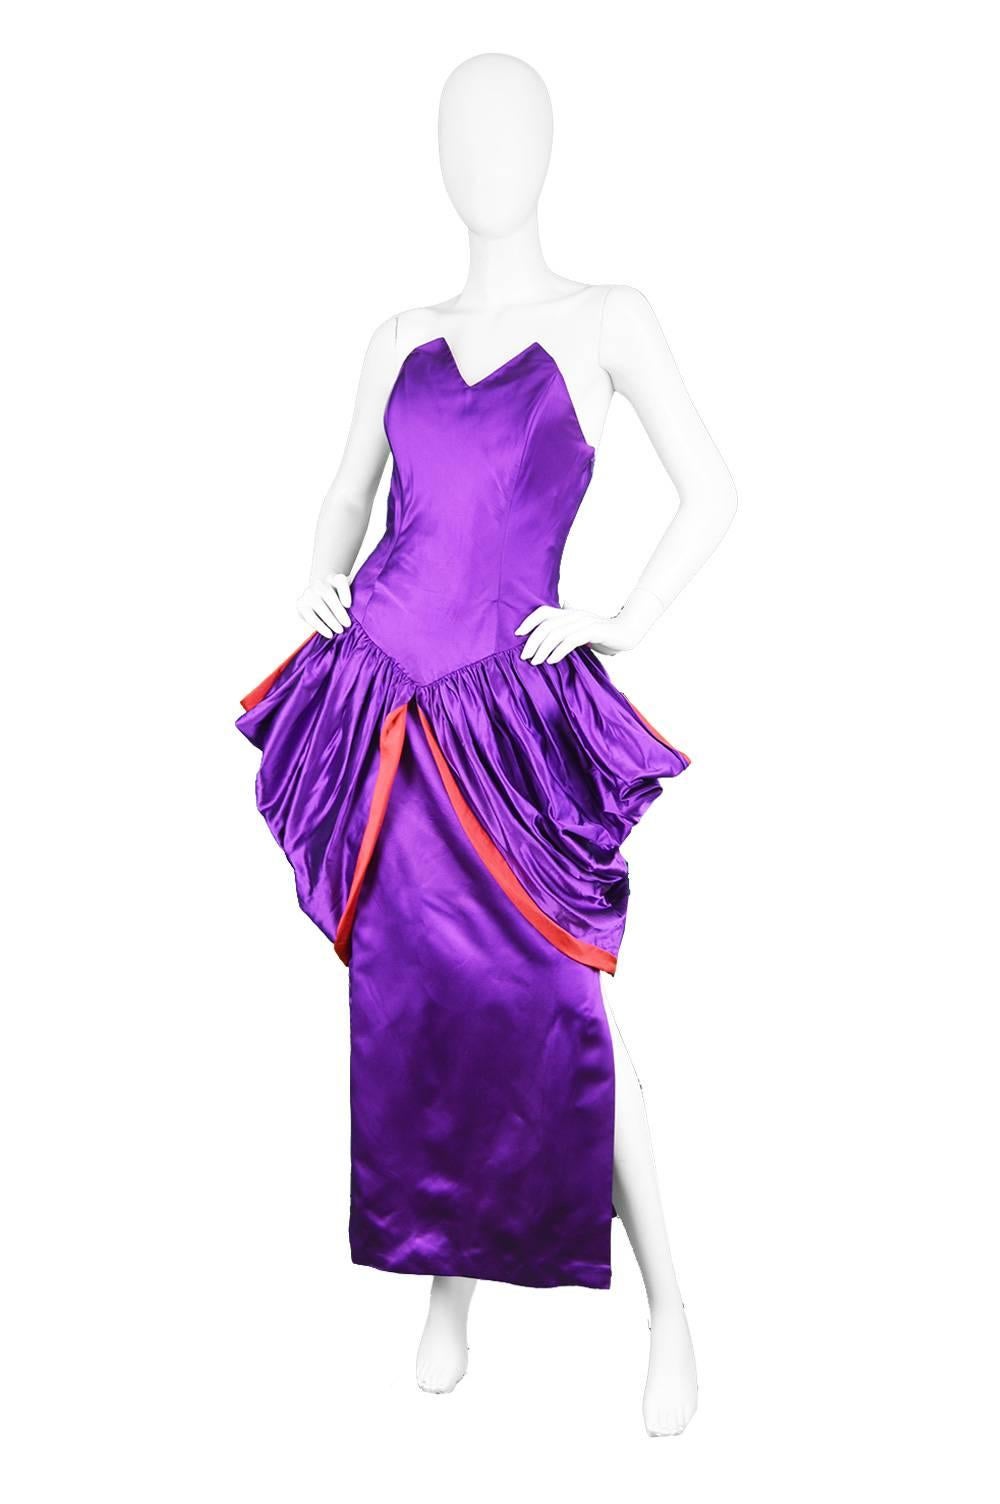 Women's Yuki Architectural Purple & Red Silk Satin Couture Evening Dress, 1980s For Sale